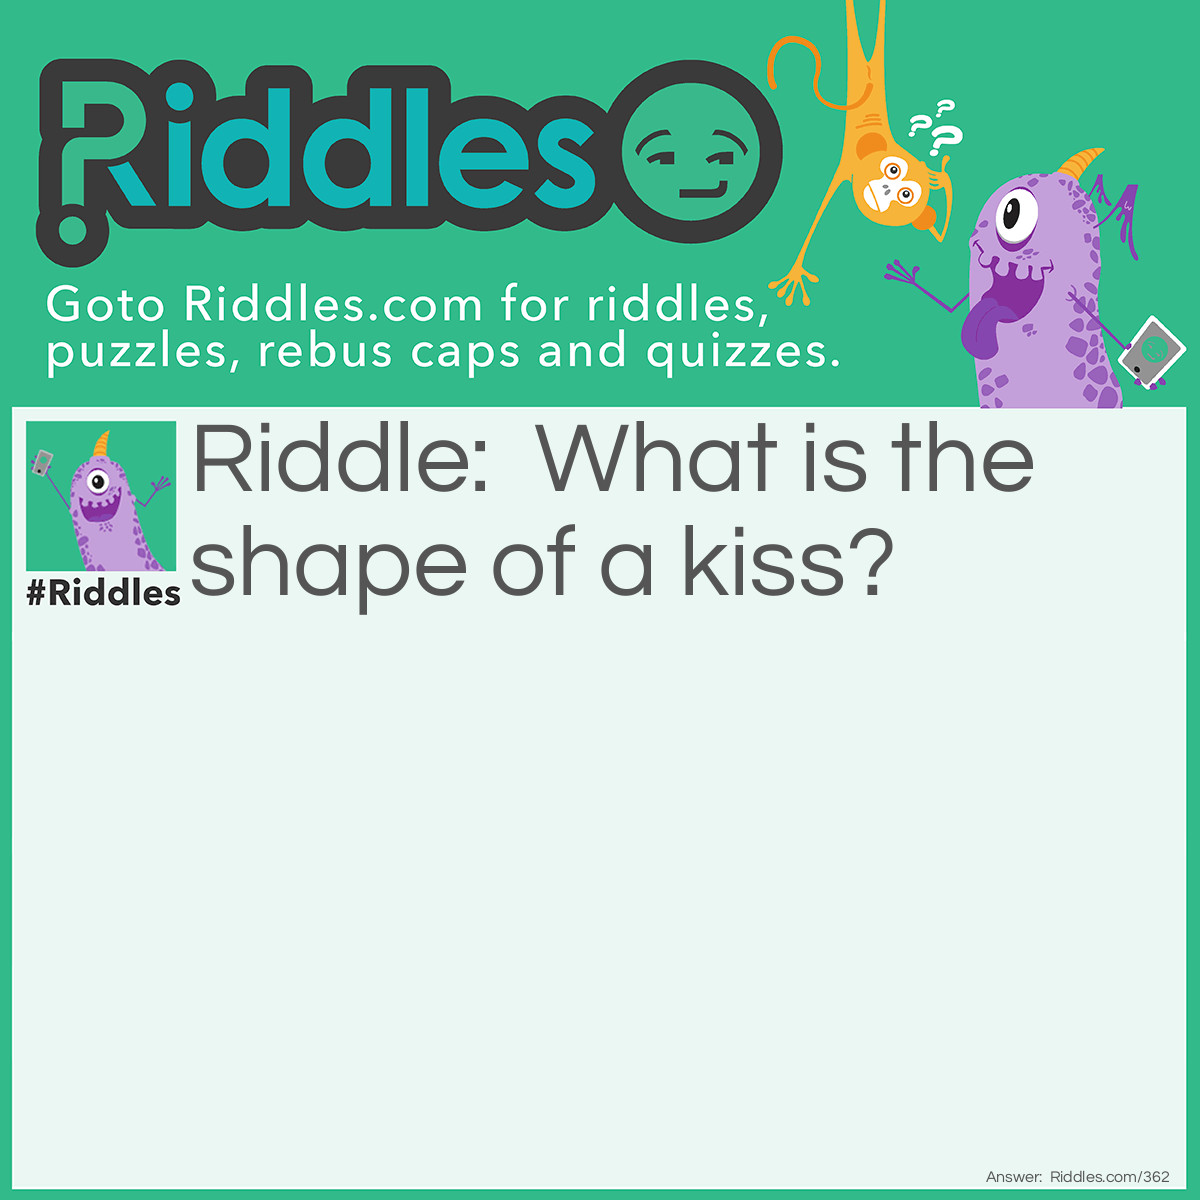 Riddle: What is the shape of a kiss? Answer: Elliptical—a-lip-tickle.